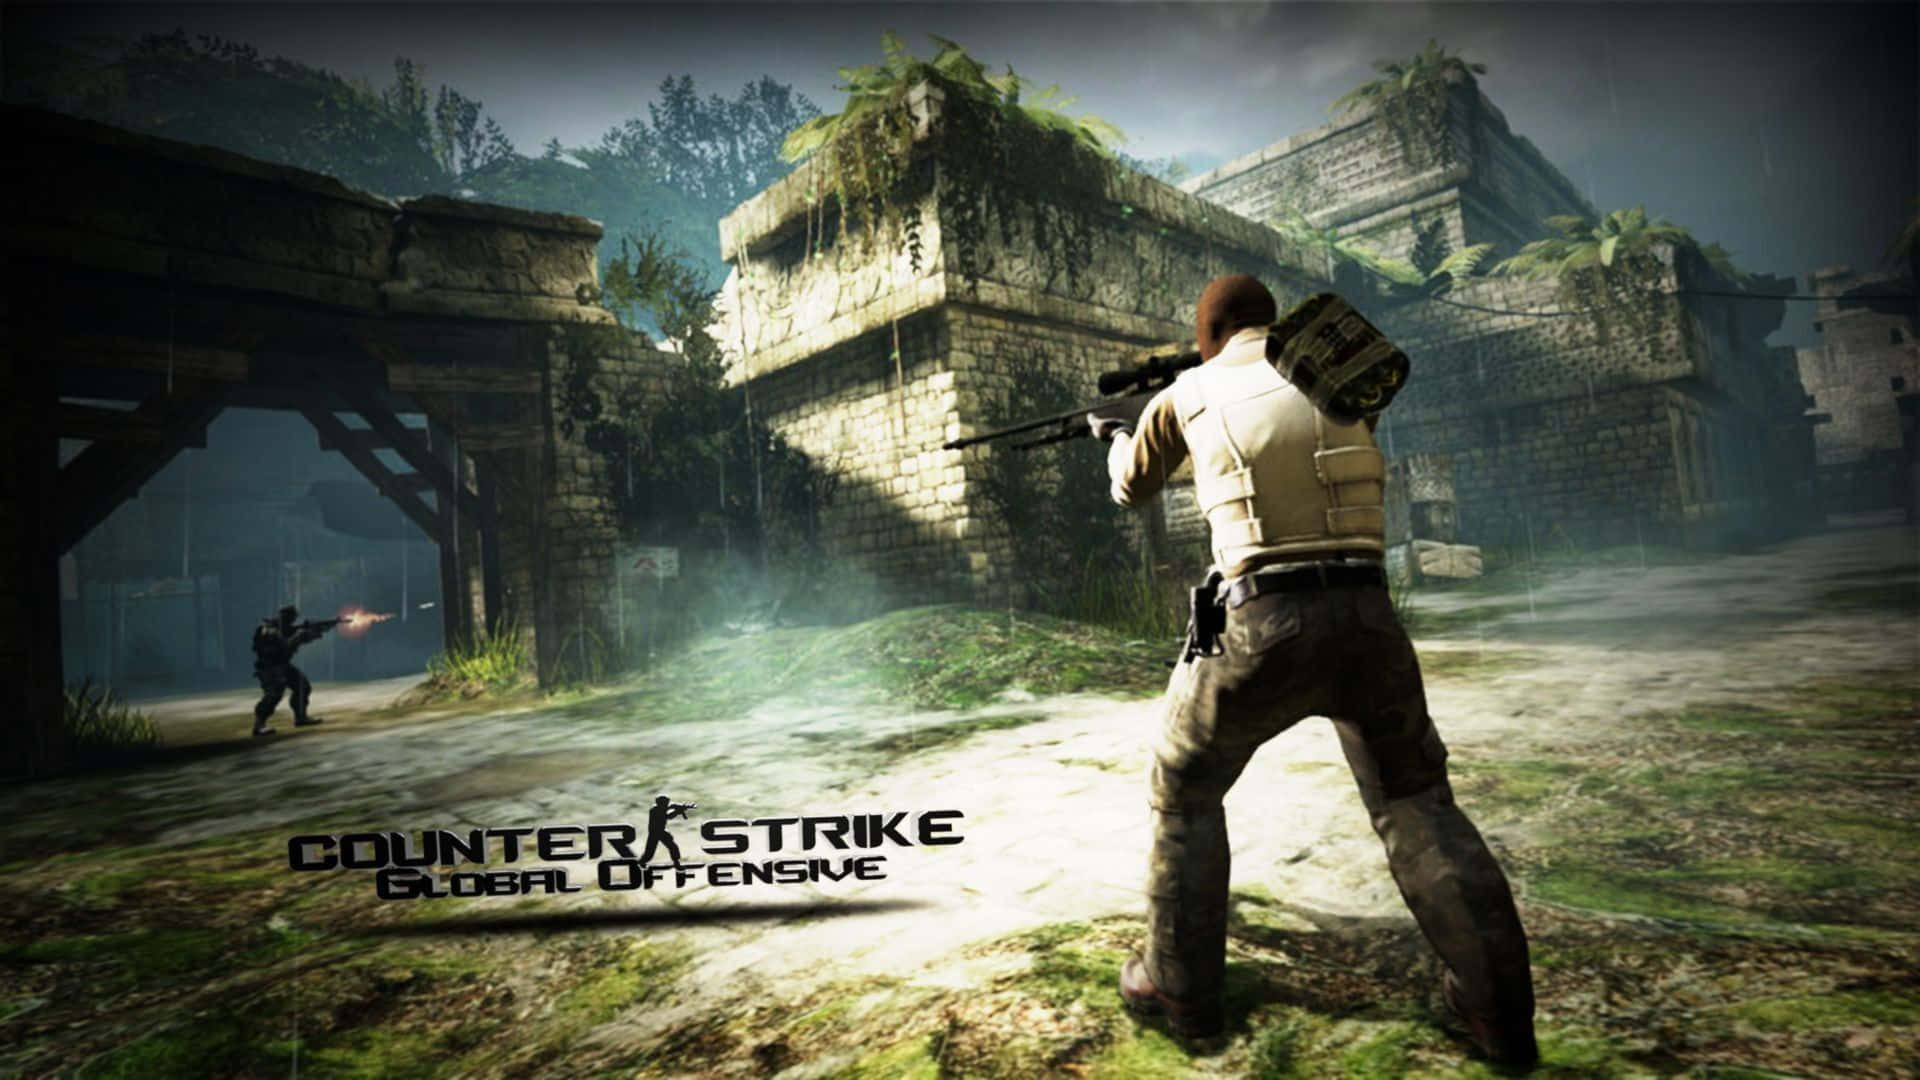 Become the master of Counterstrike